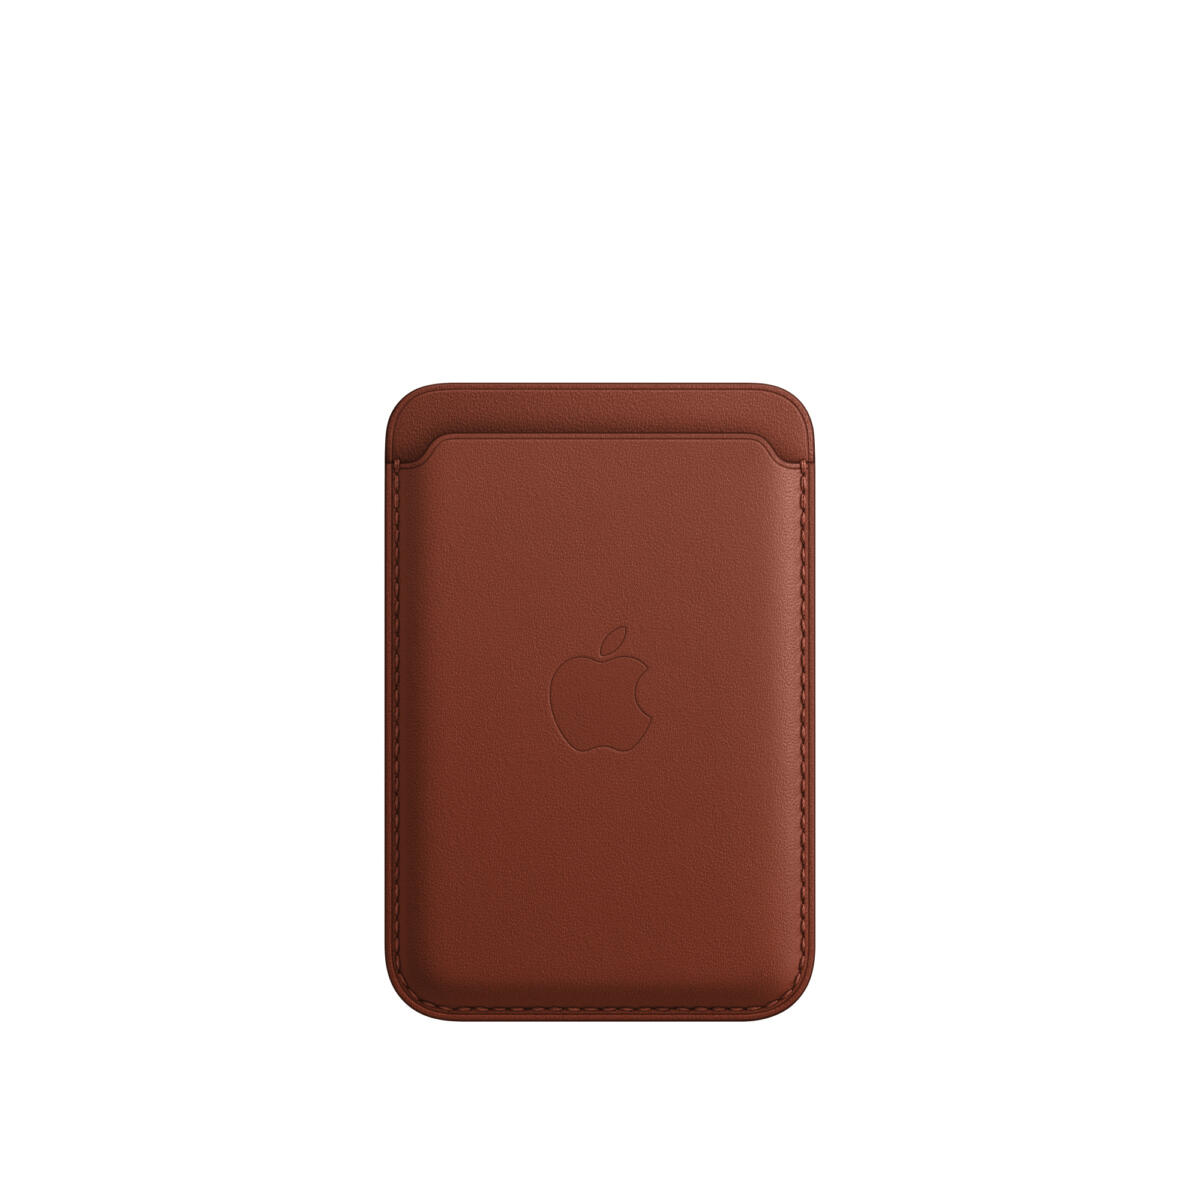 Apple MagSafe Leather Wallet with Find My Built In! 